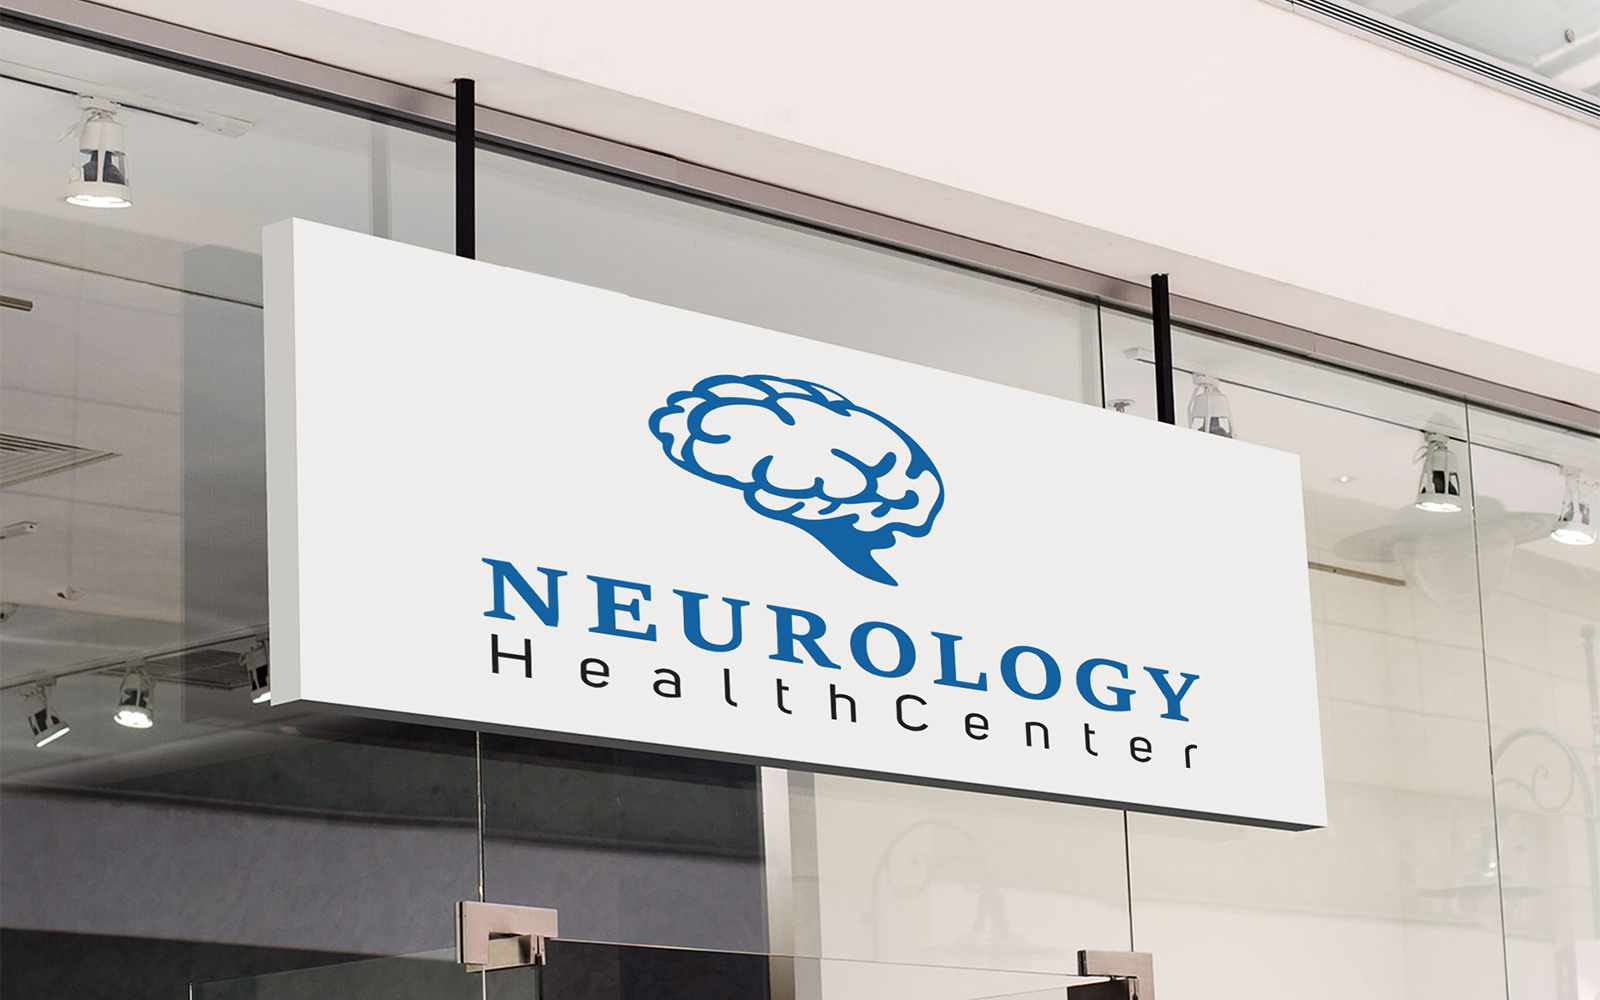 Design performance neurology logo in 1 day by Tina_solis | Fiverr